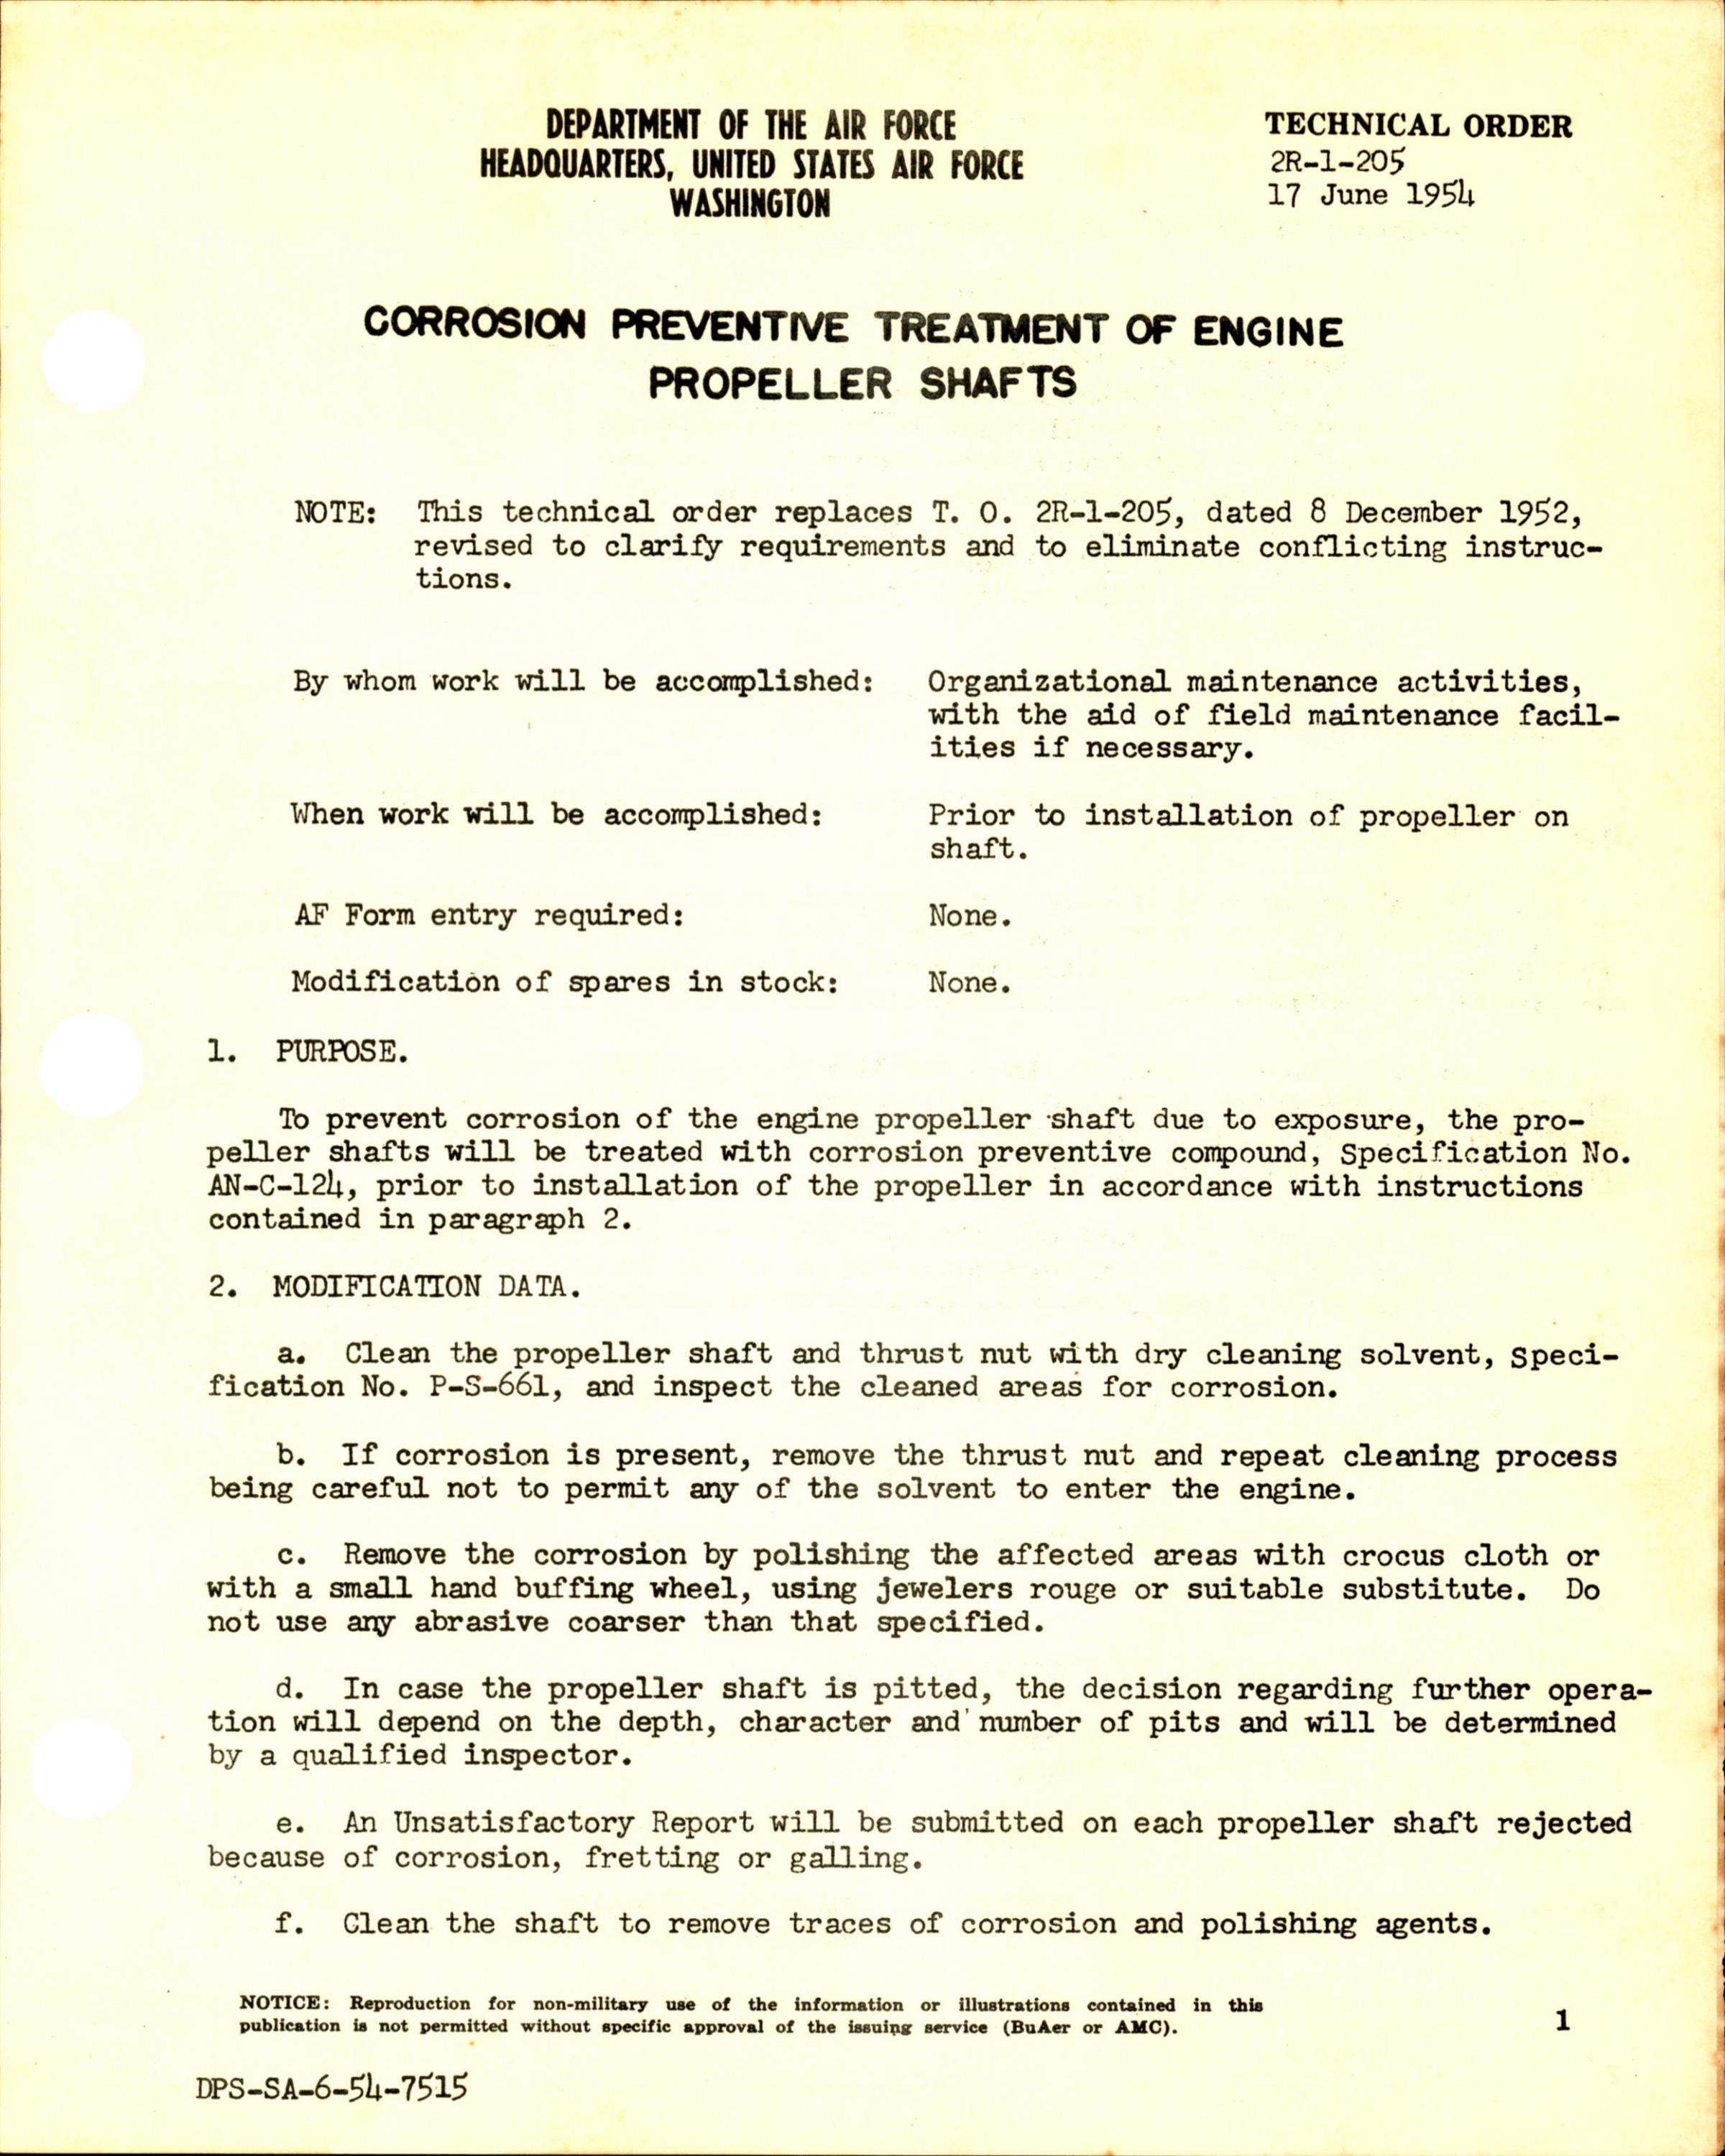 Sample page 1 from AirCorps Library document: Corrosion Preventative Treatment of Engine Propeller Shafts